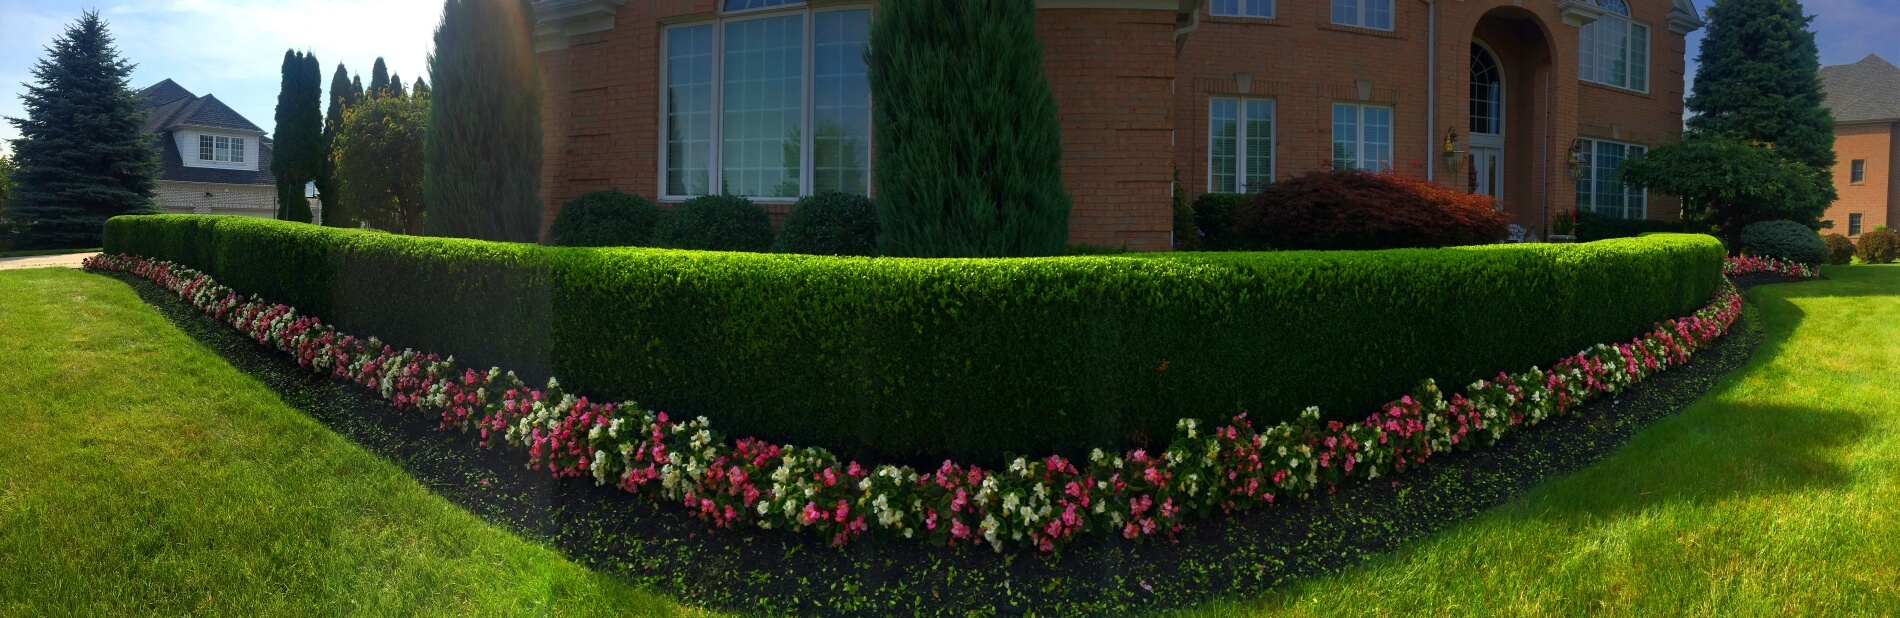 Residential Landscaping Pittsburgh